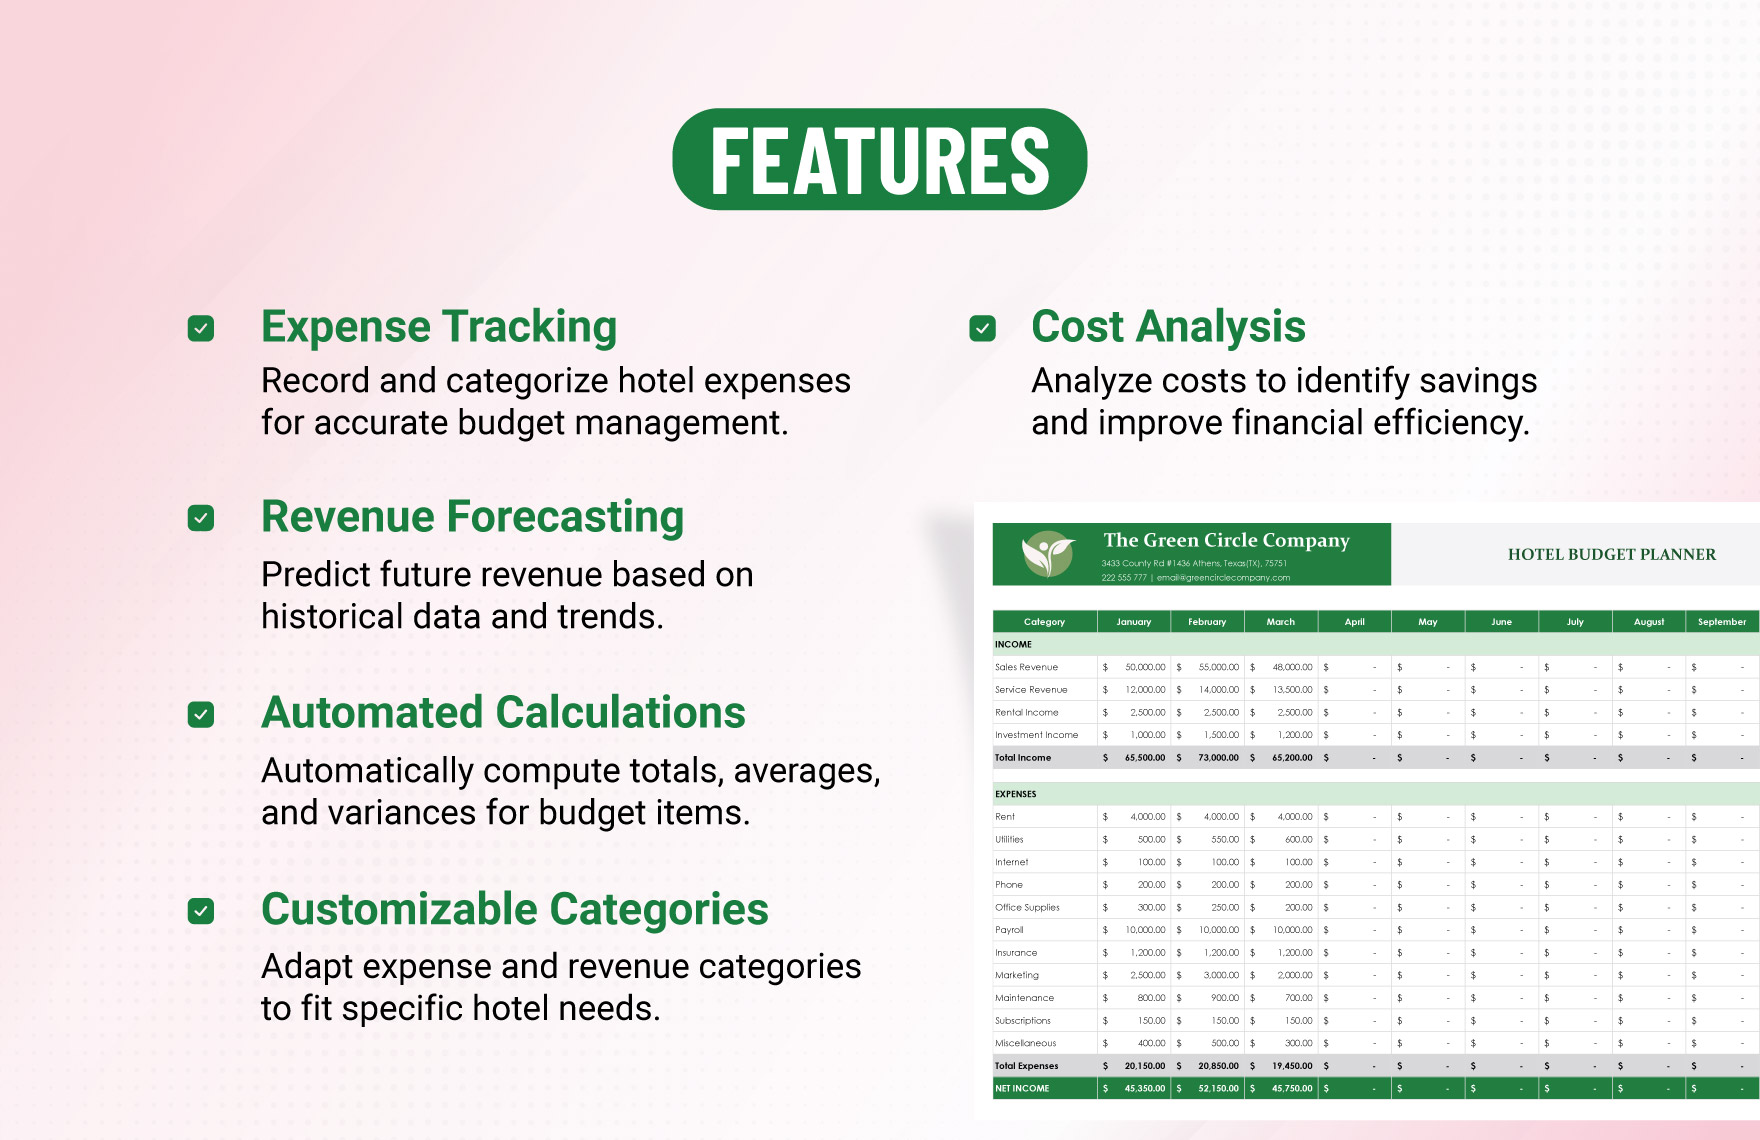 Hotel Budget Planner Template